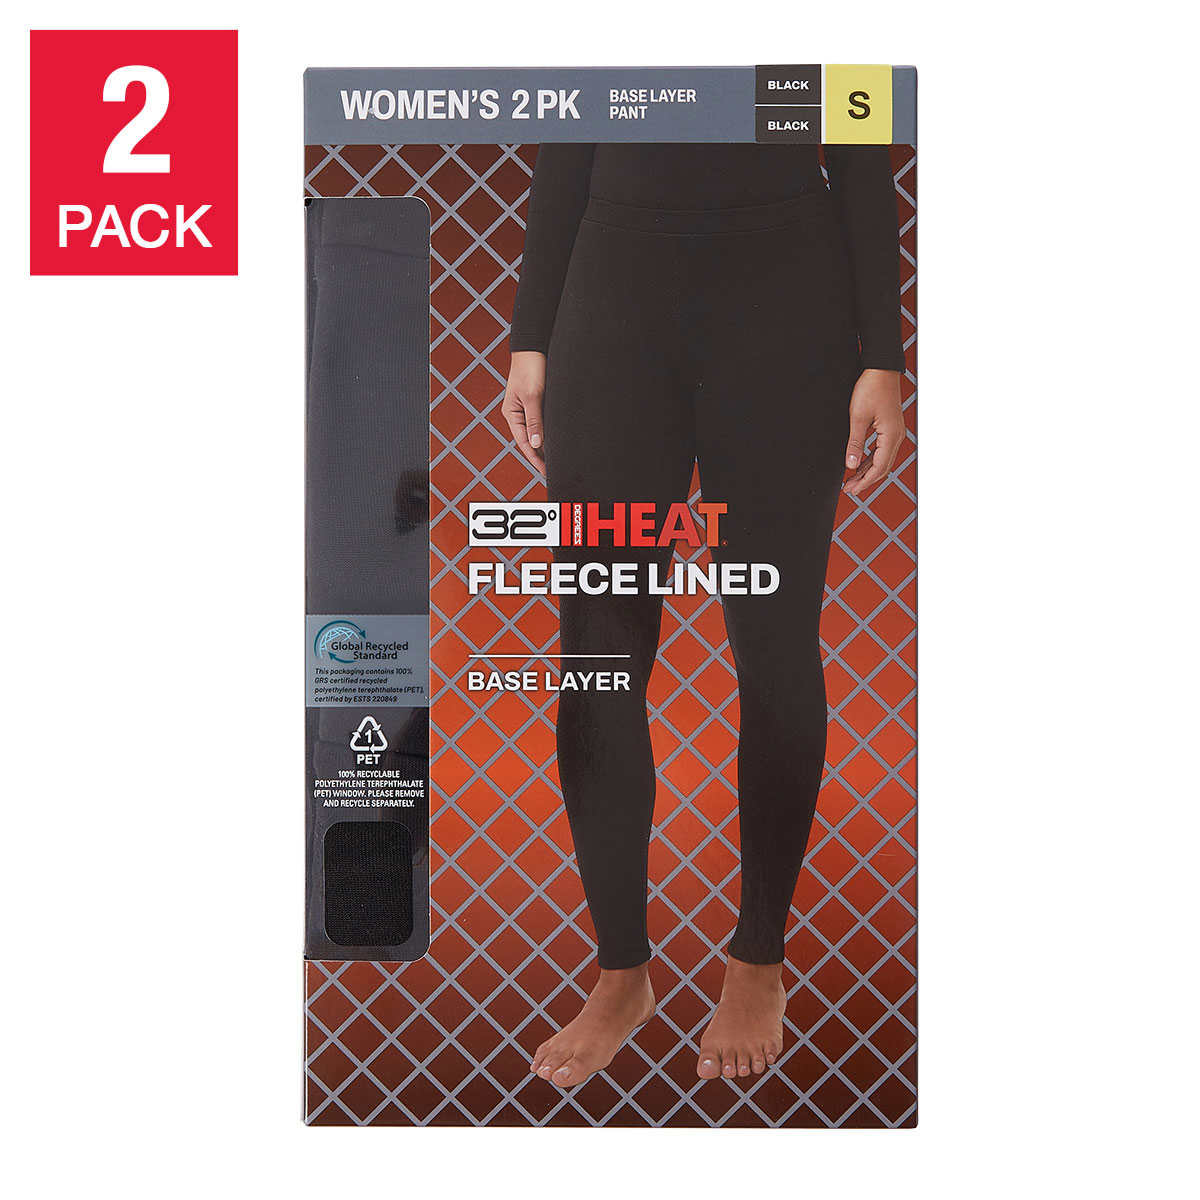 32 Degrees Heat Ladies' Fleece Lined Base Layer Pant, 2-pack